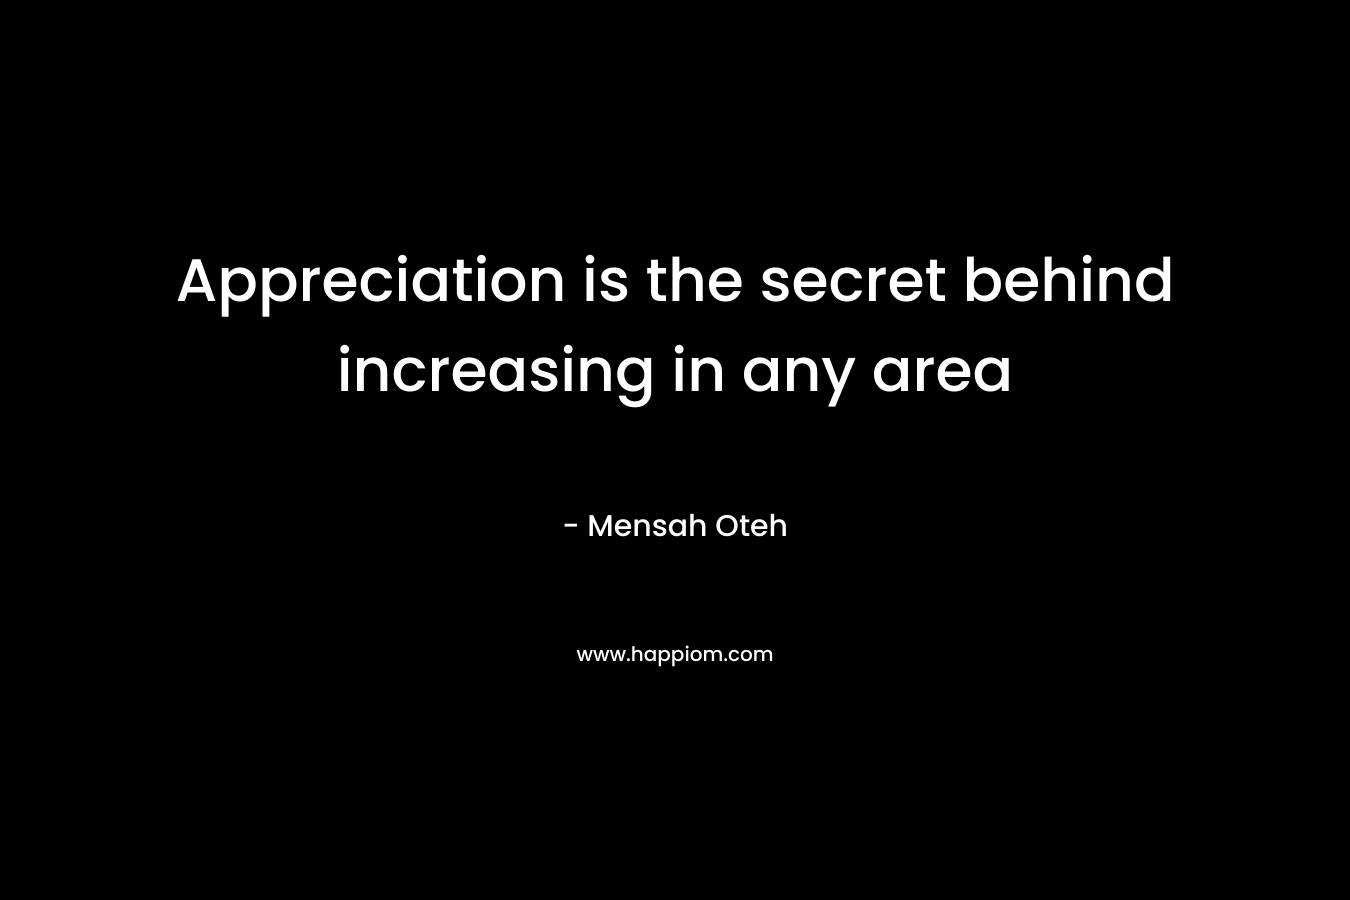 Appreciation is the secret behind increasing in any area